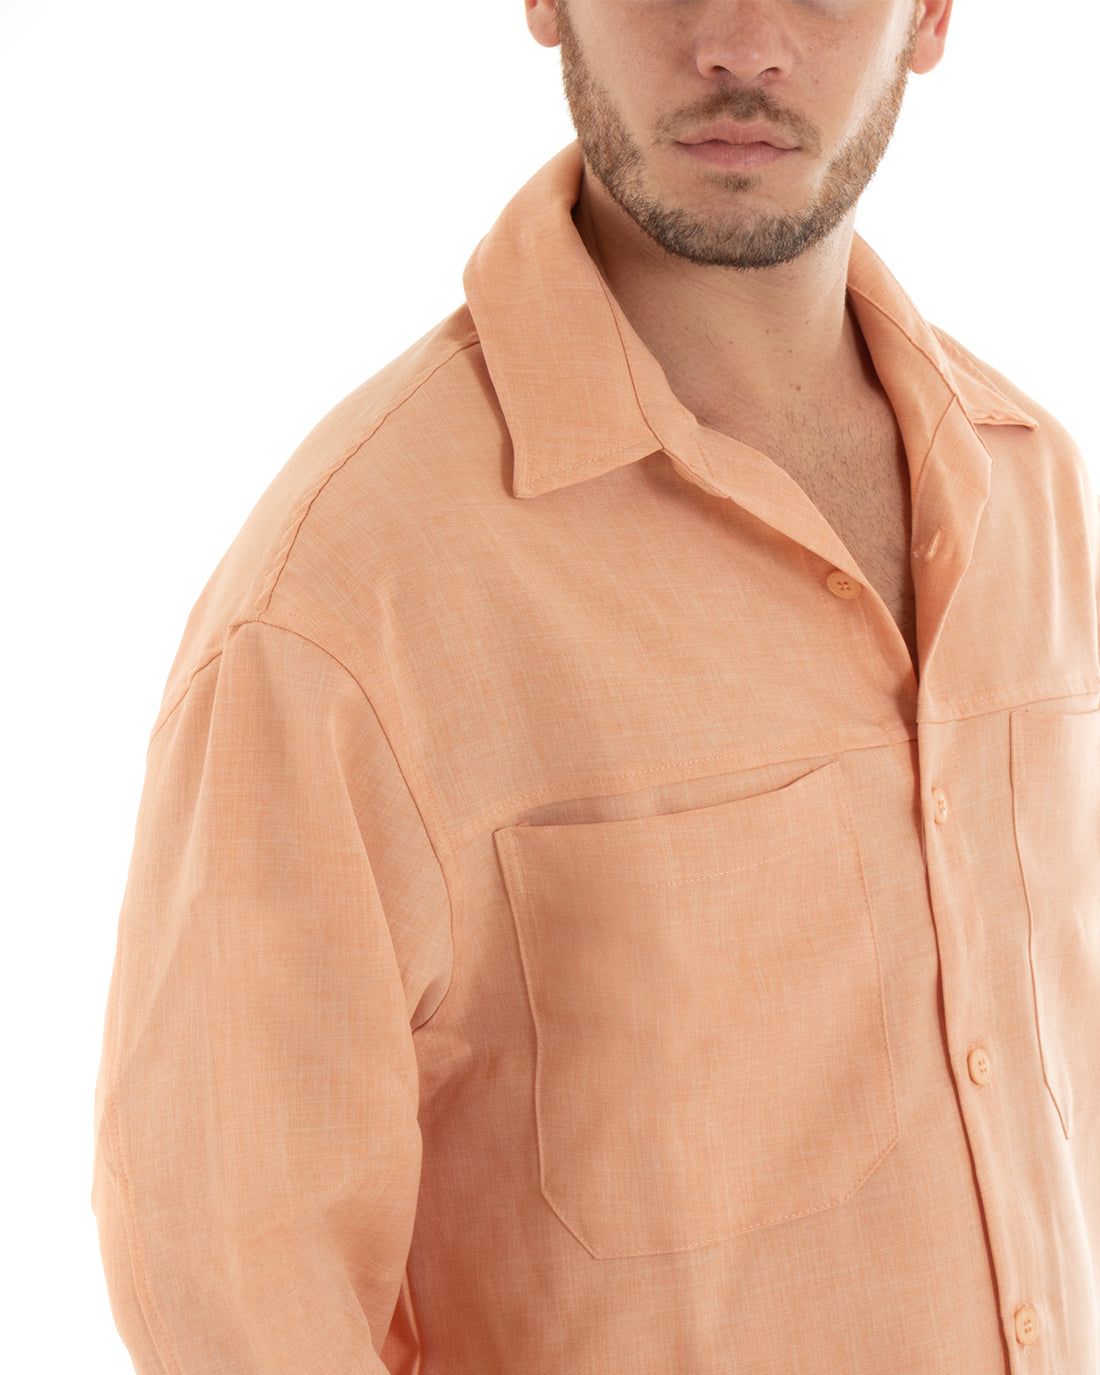 Cropped Fit Men's Shirt Long Sleeve Pocket Solid Color Peach GIOSAL-C2662A 